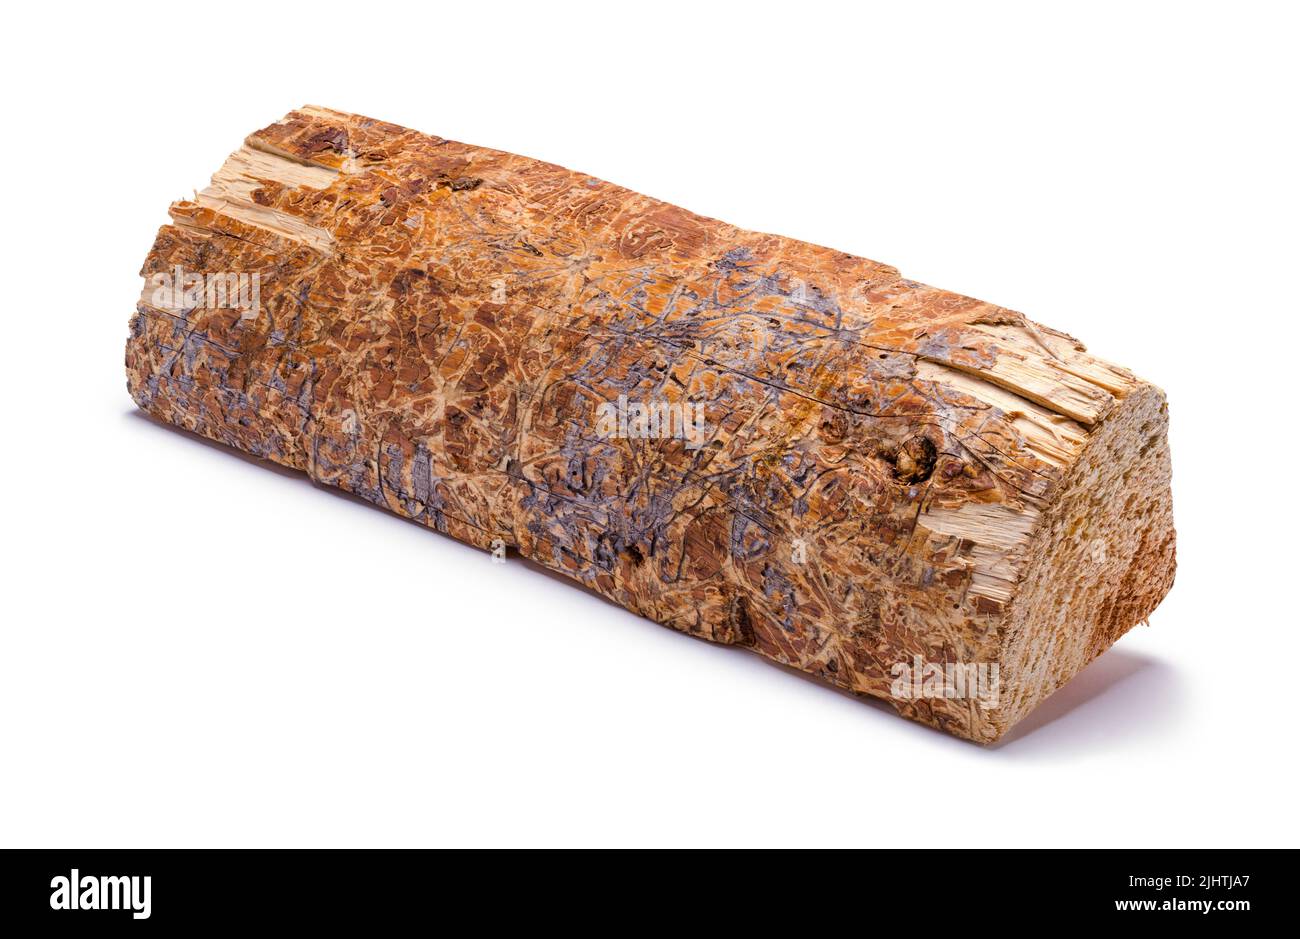 Single Firewood Log Cut Out On White. Stock Photo